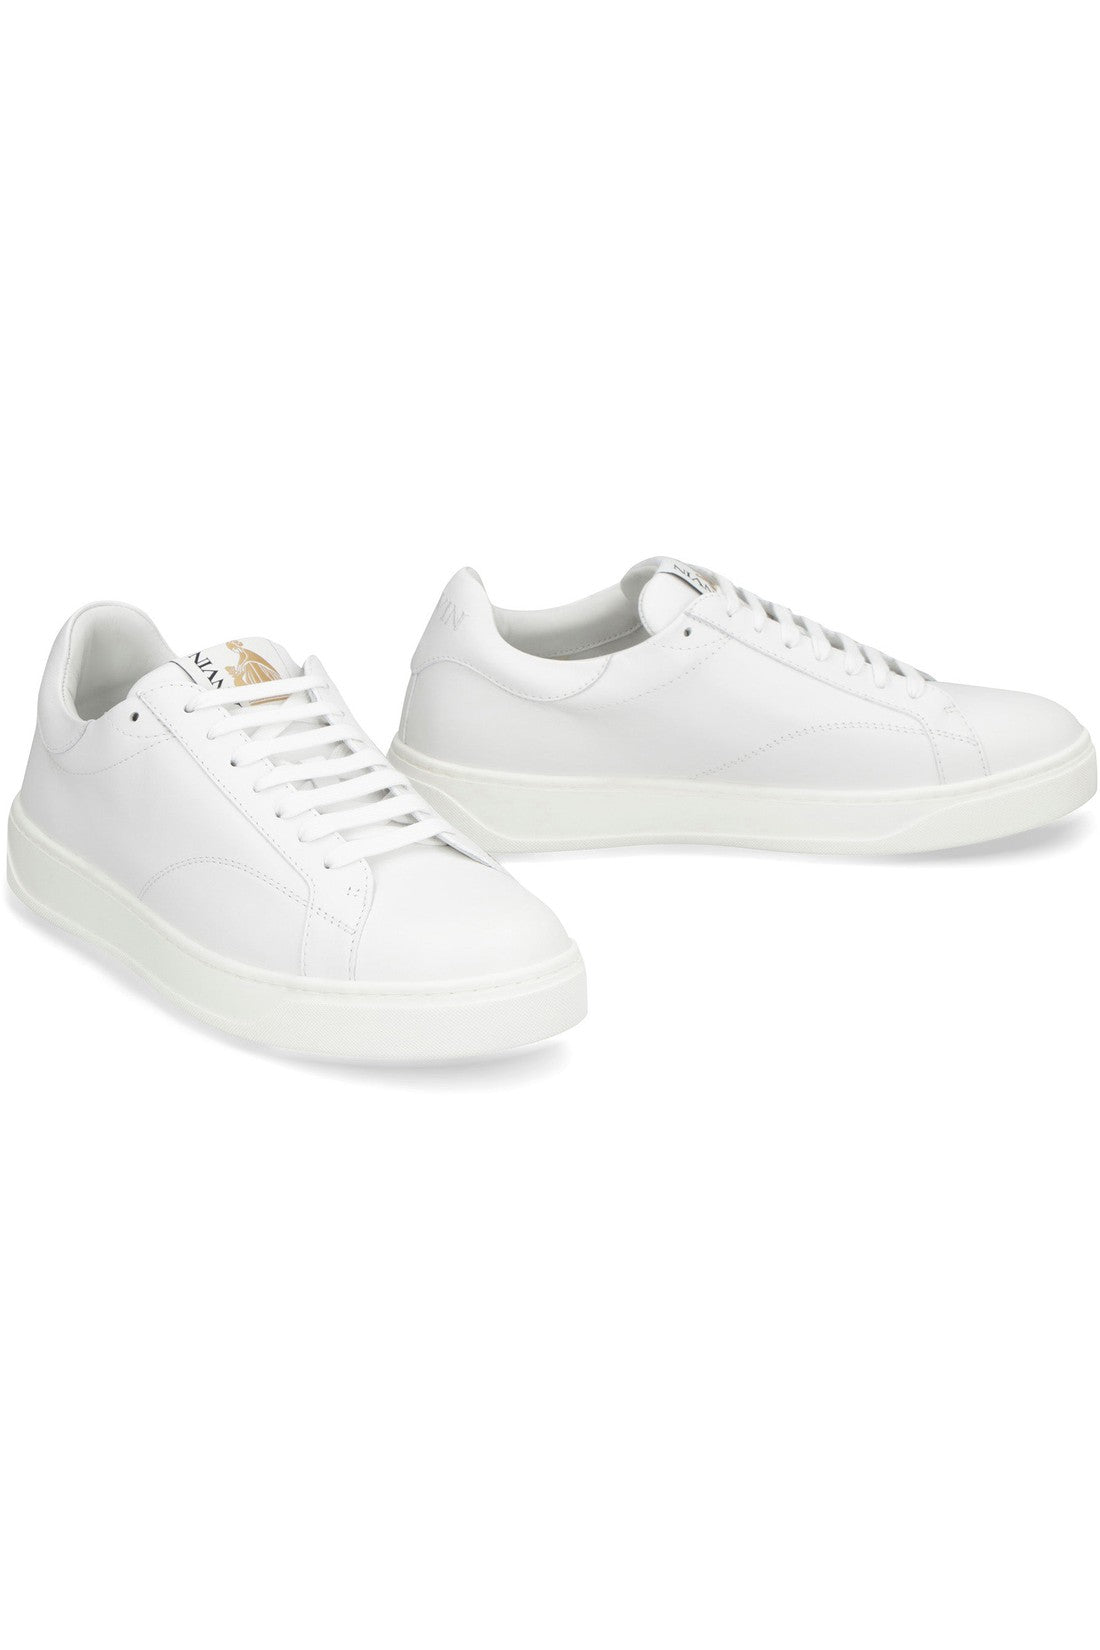 Lanvin-OUTLET-SALE-DDB0 leather low-top sneakers-ARCHIVIST